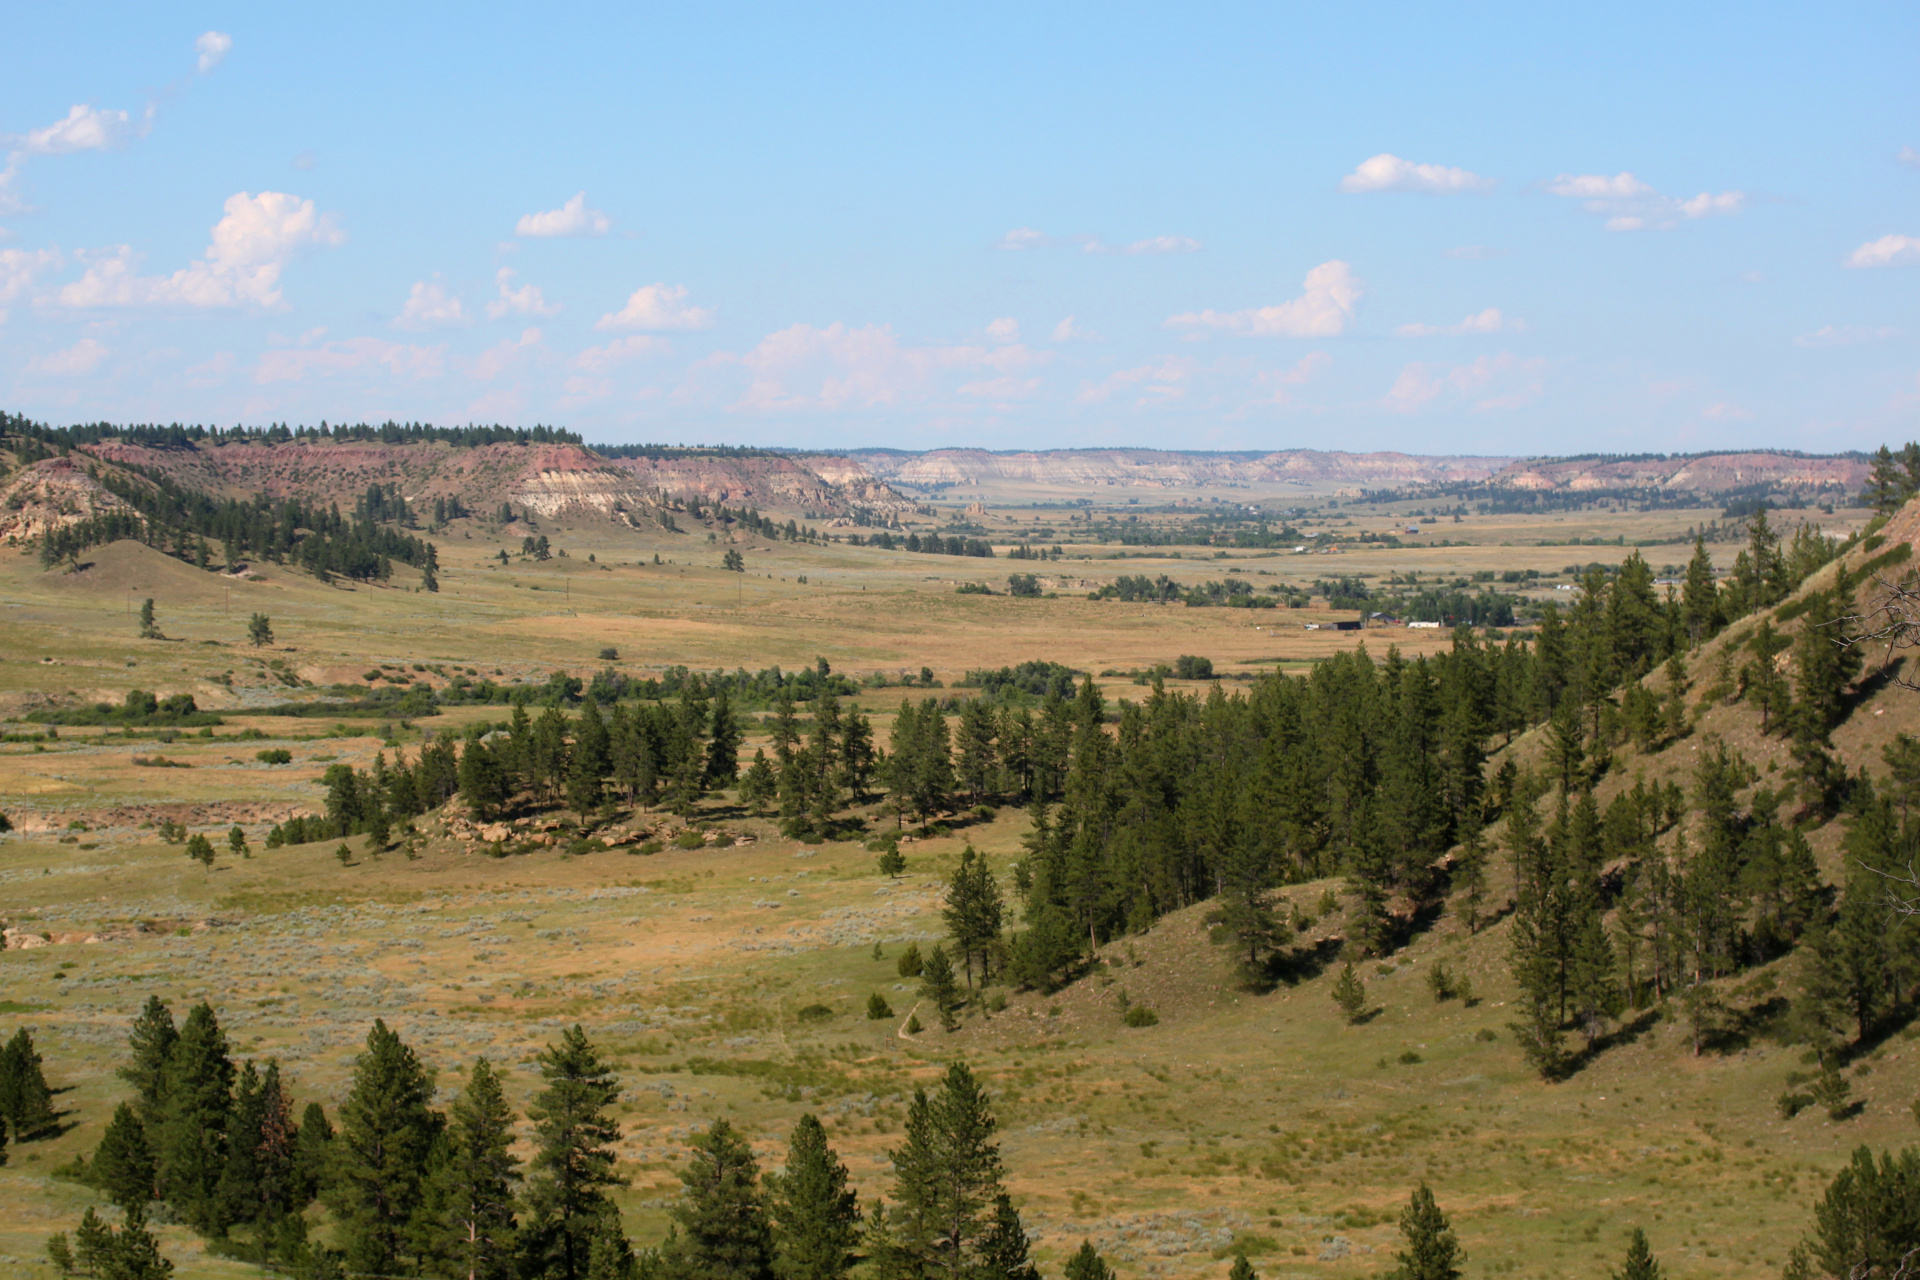 Cheyenne Lands: Rosebud Creek and Lynch Coulee (Travels » US Trip 3: The Roads Not Taken » The Rez)